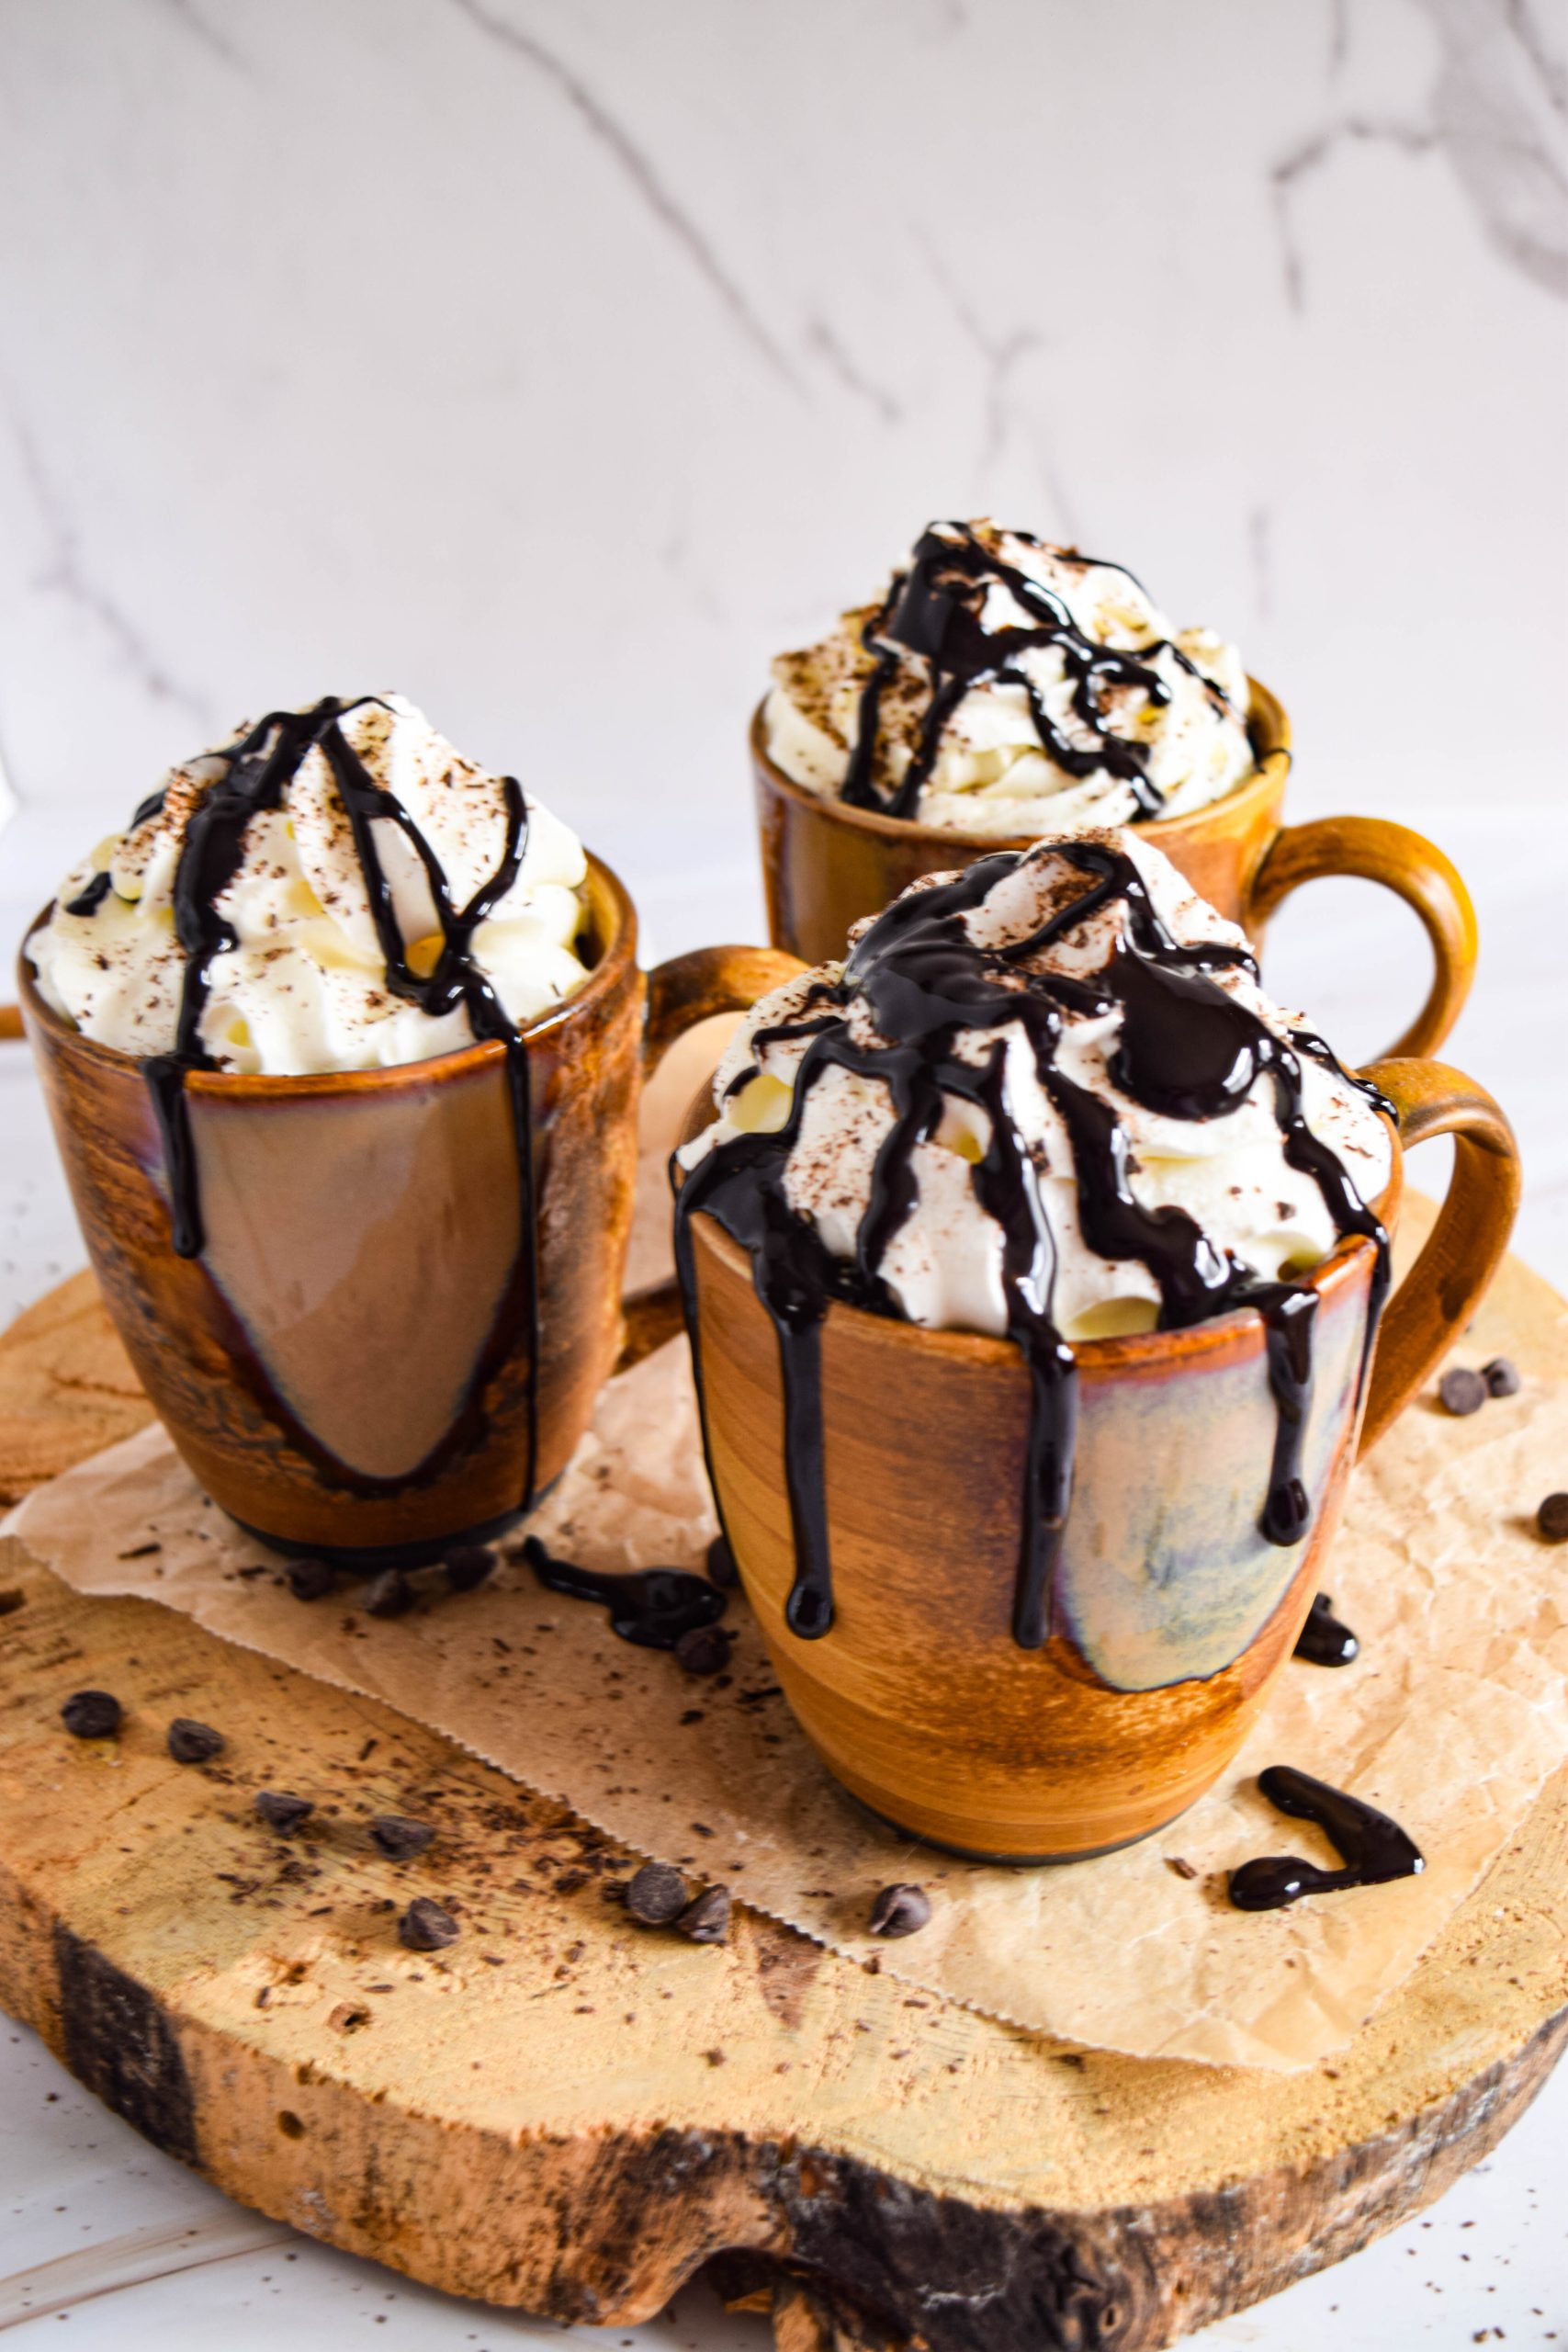 How to Make Healthy Hot Chocolate With Coconut Whipped Cream